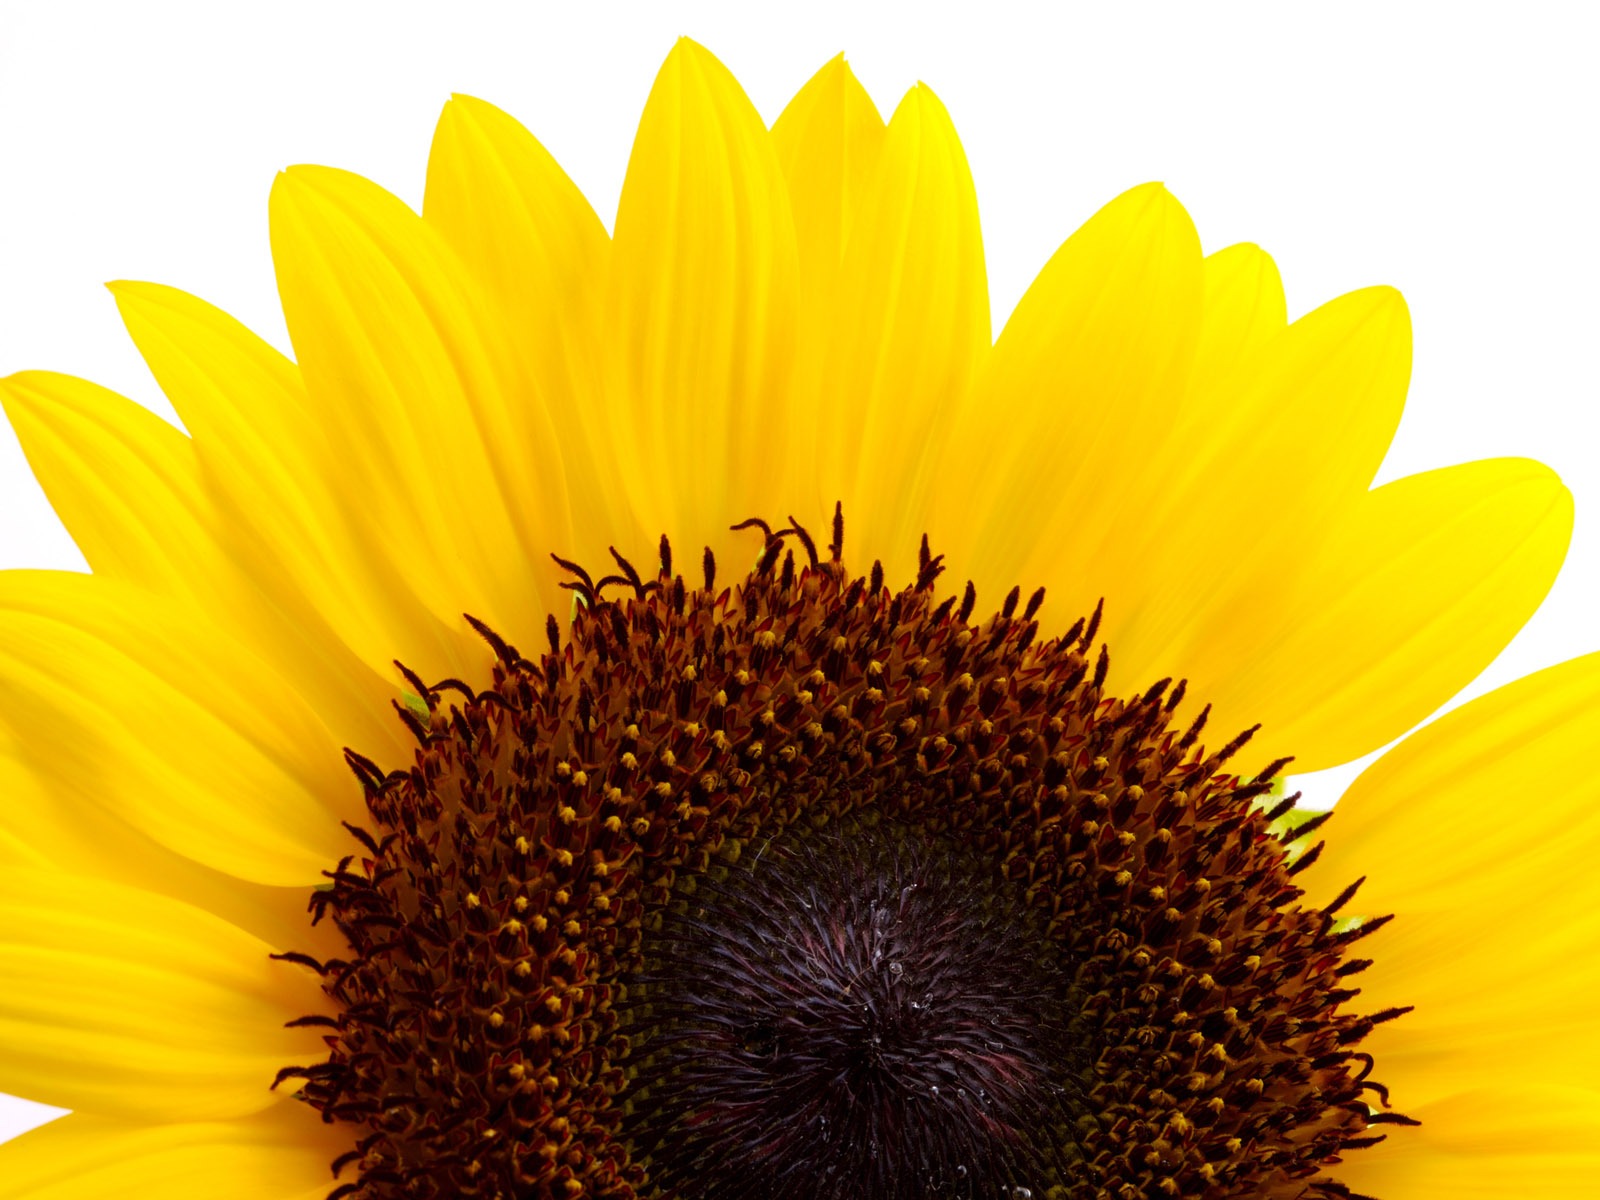 Sunny sunflower photo HD Wallpapers #18 - 1600x1200